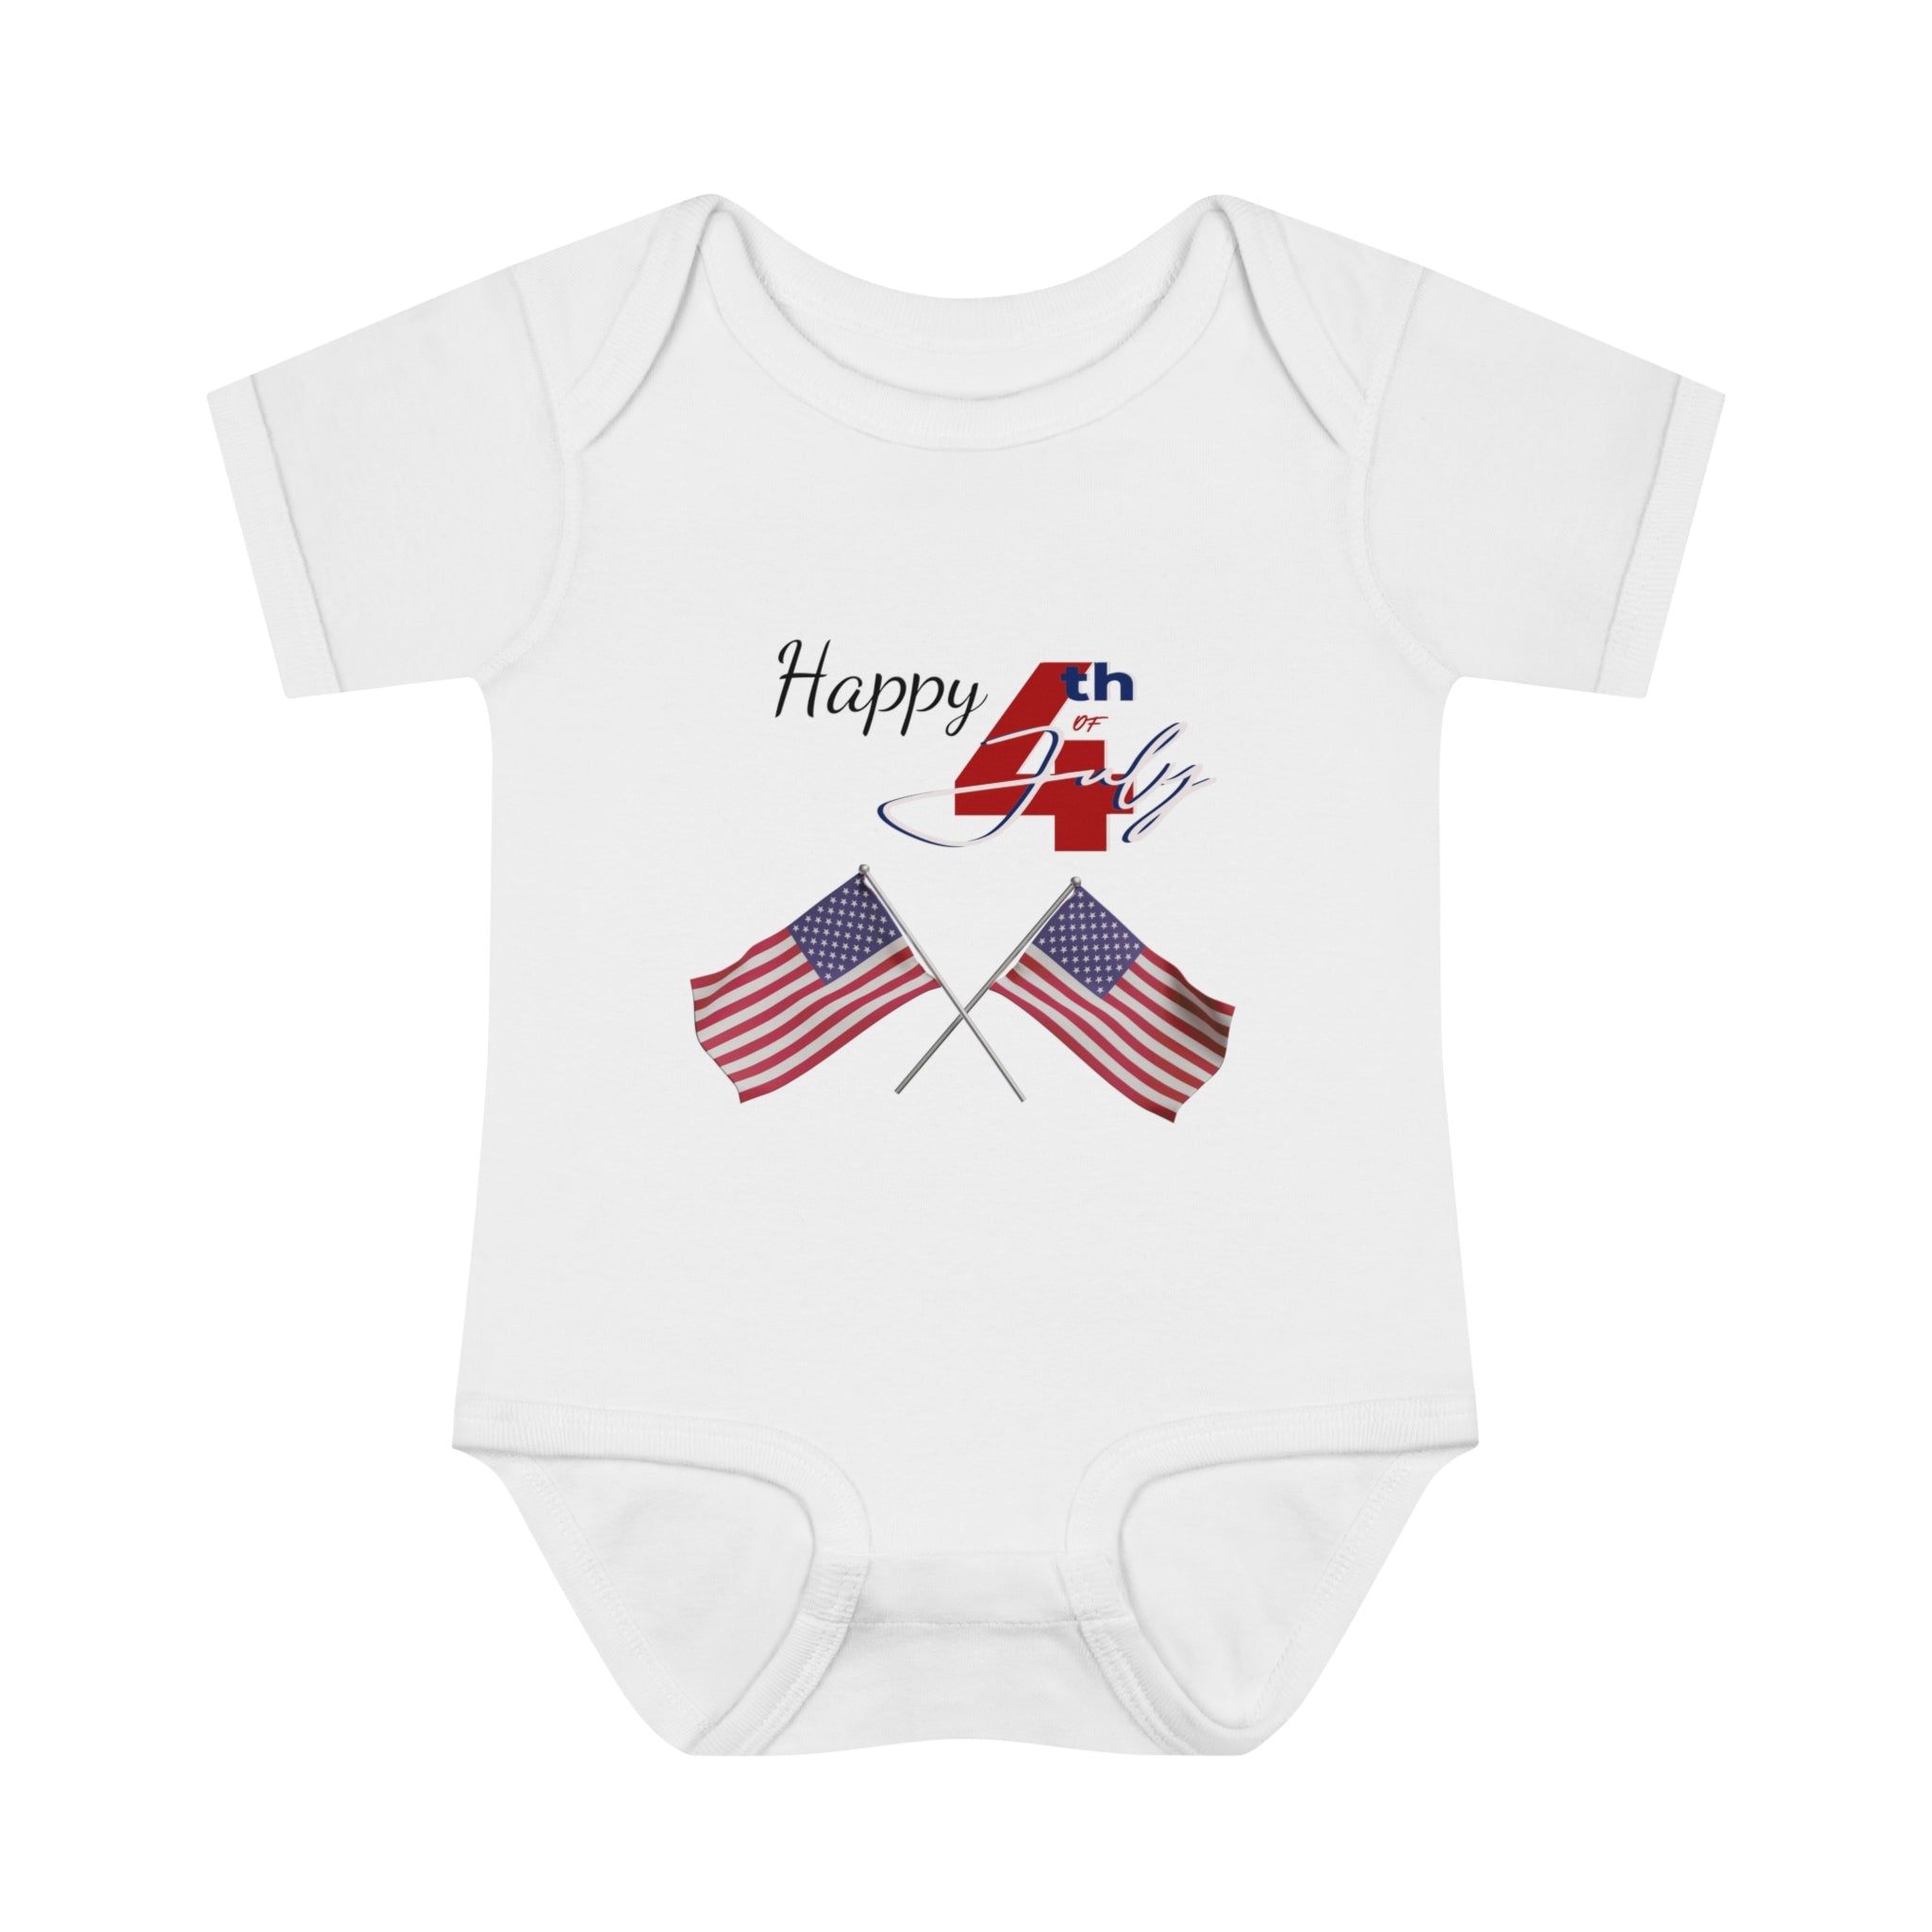 Happy 4th of July American Flags design Baby Bodysuit